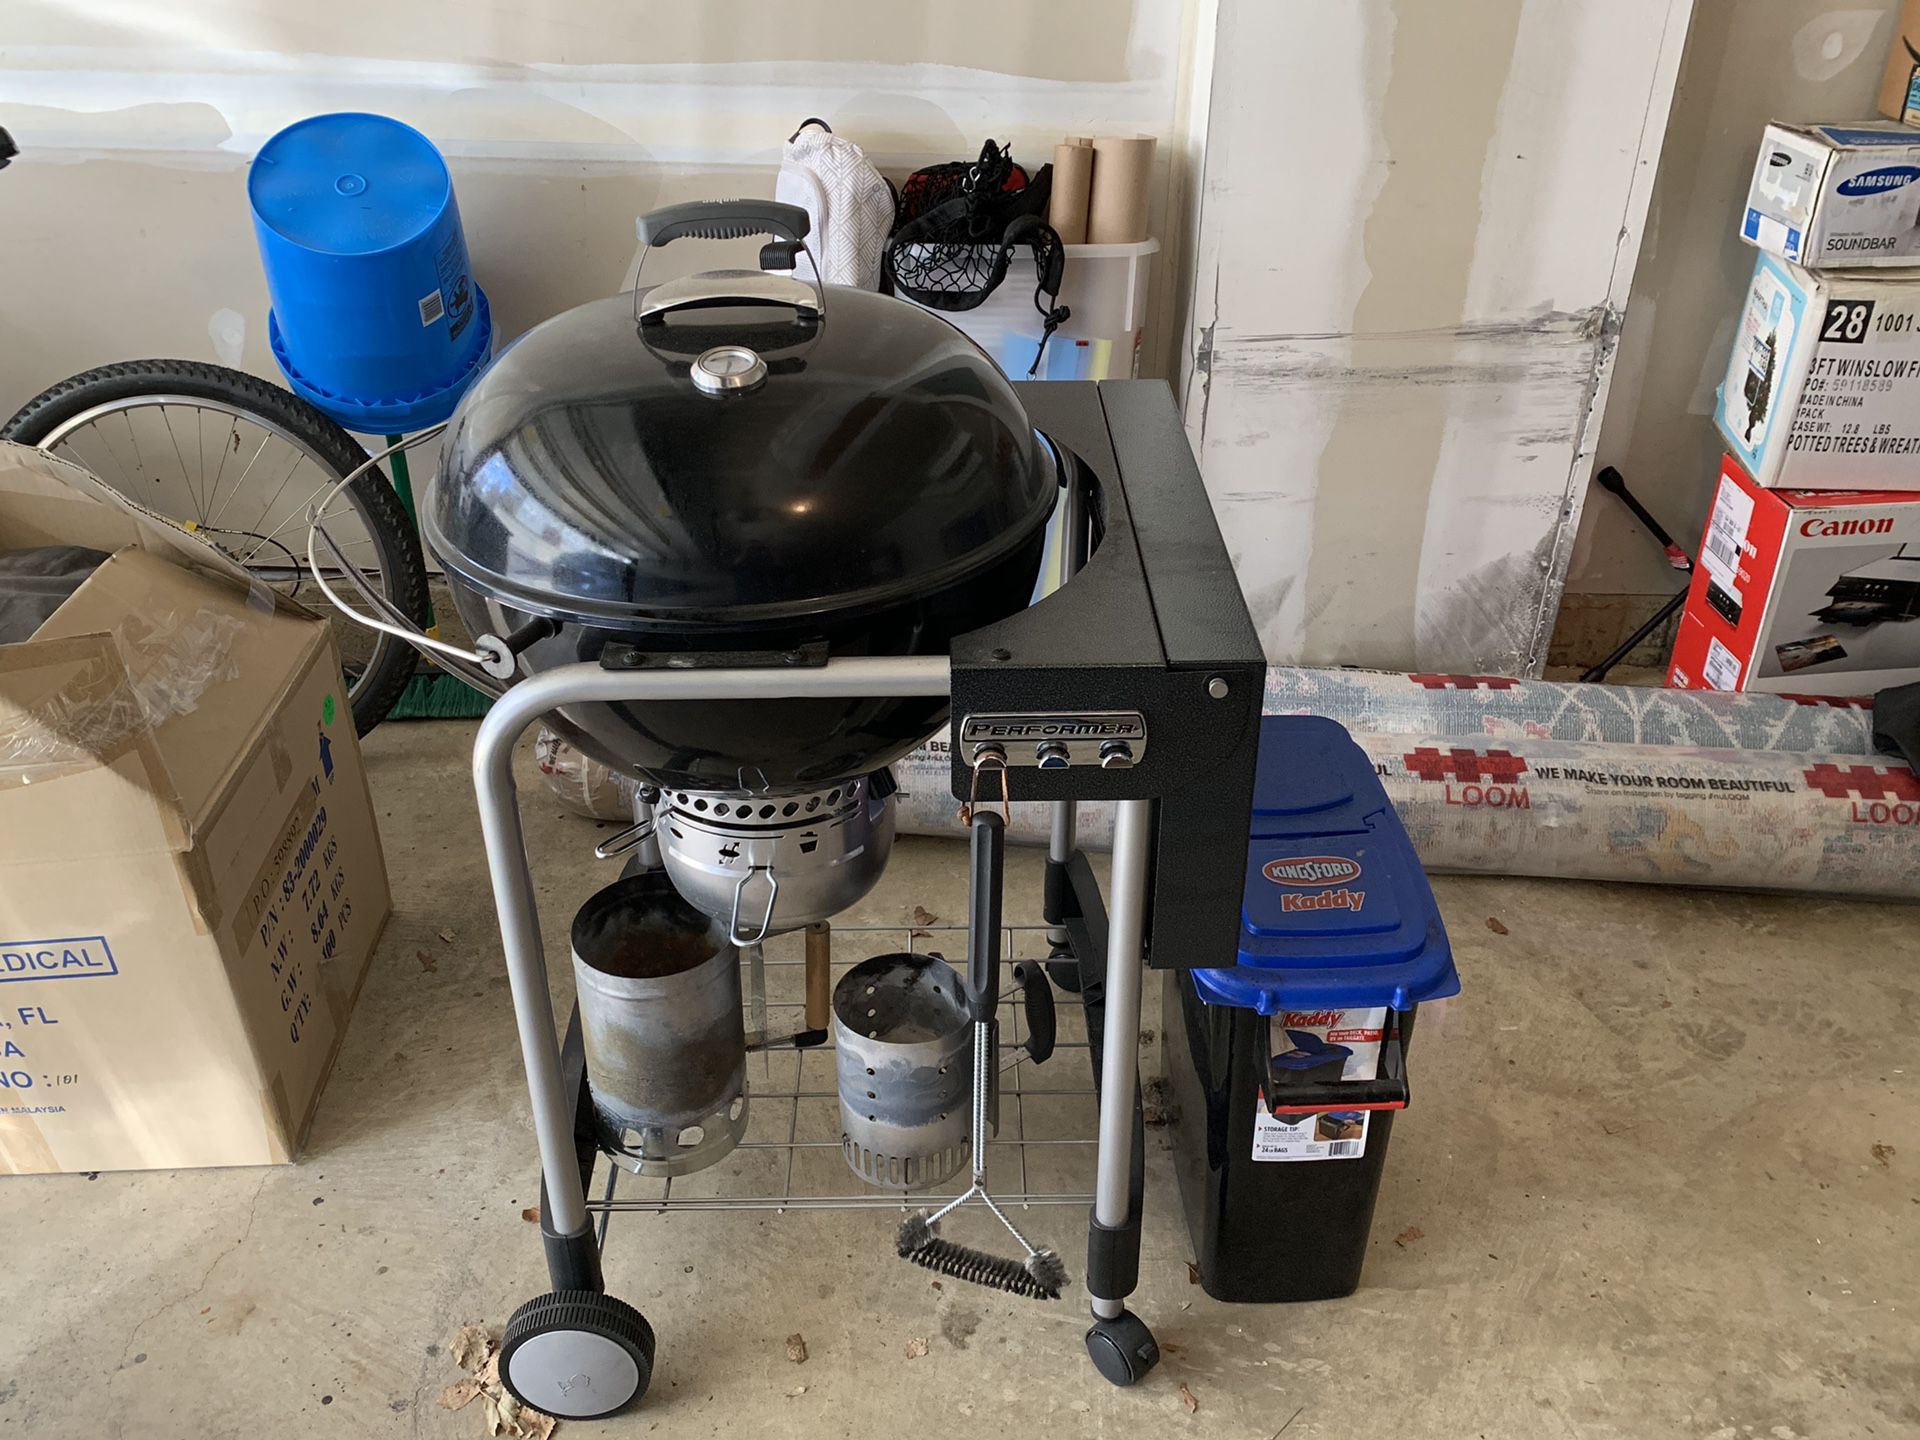 Weber 22” Performer charcoal grill and accessories